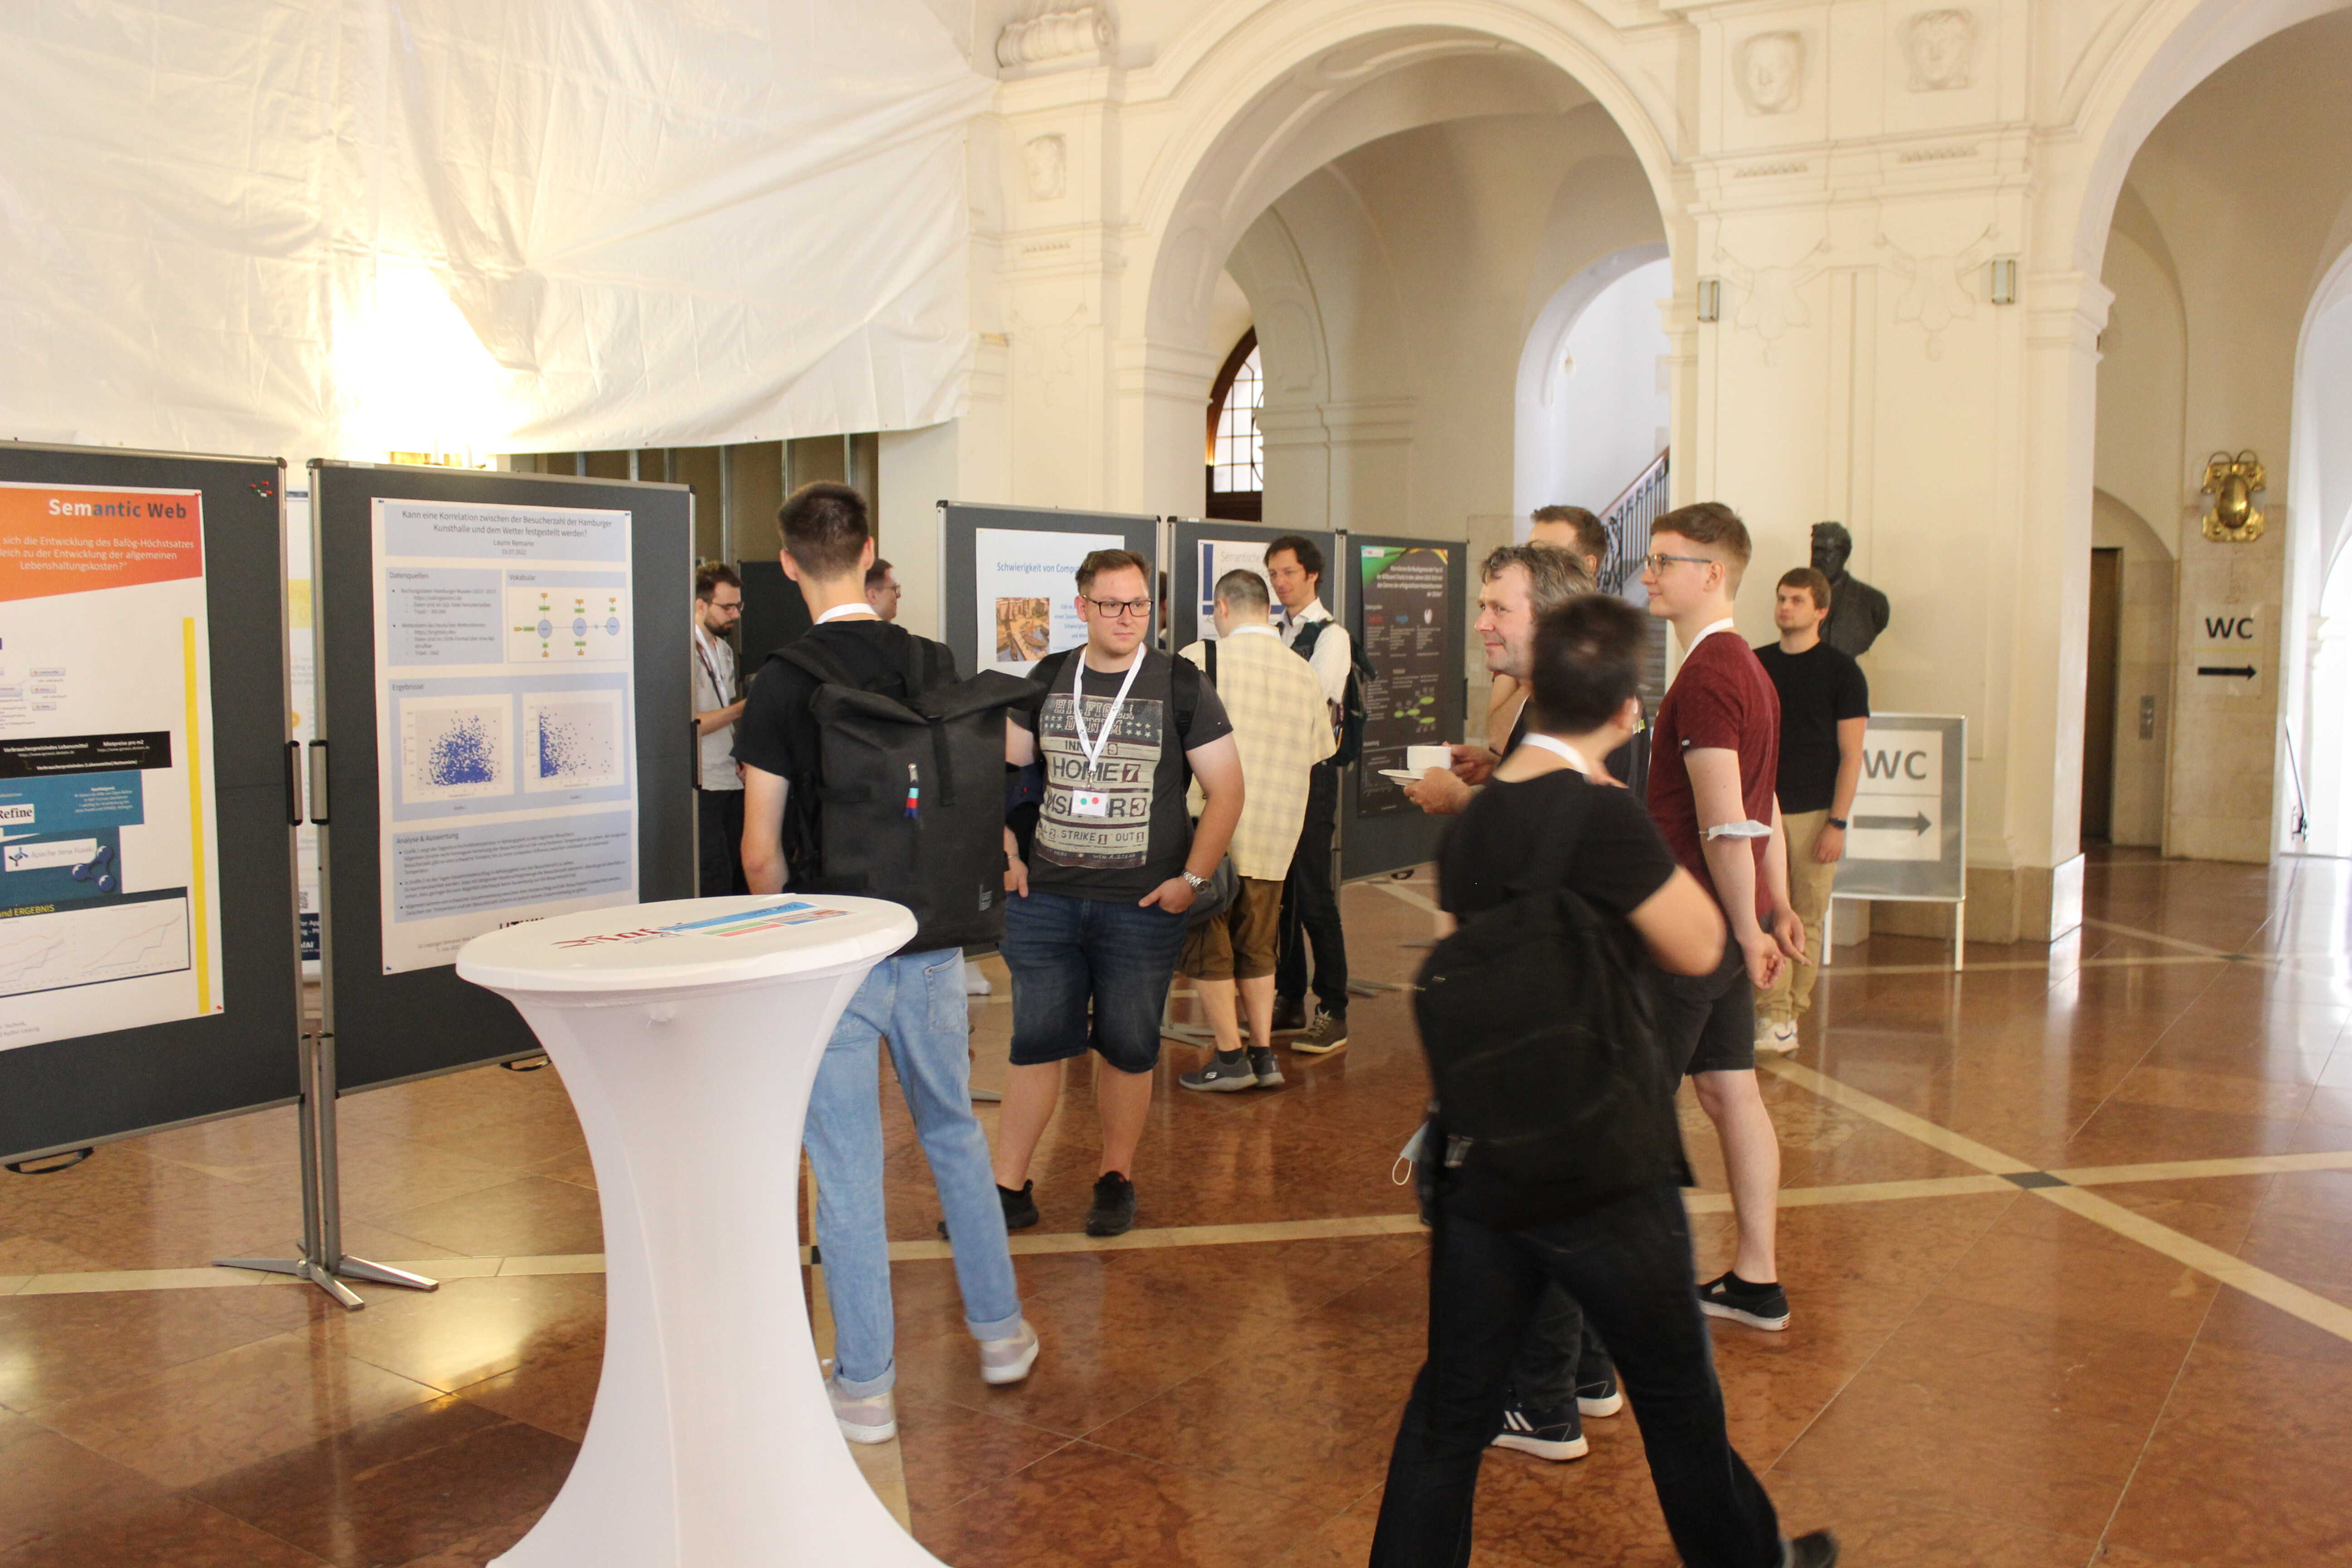 Image of visitors and students at the poster session.